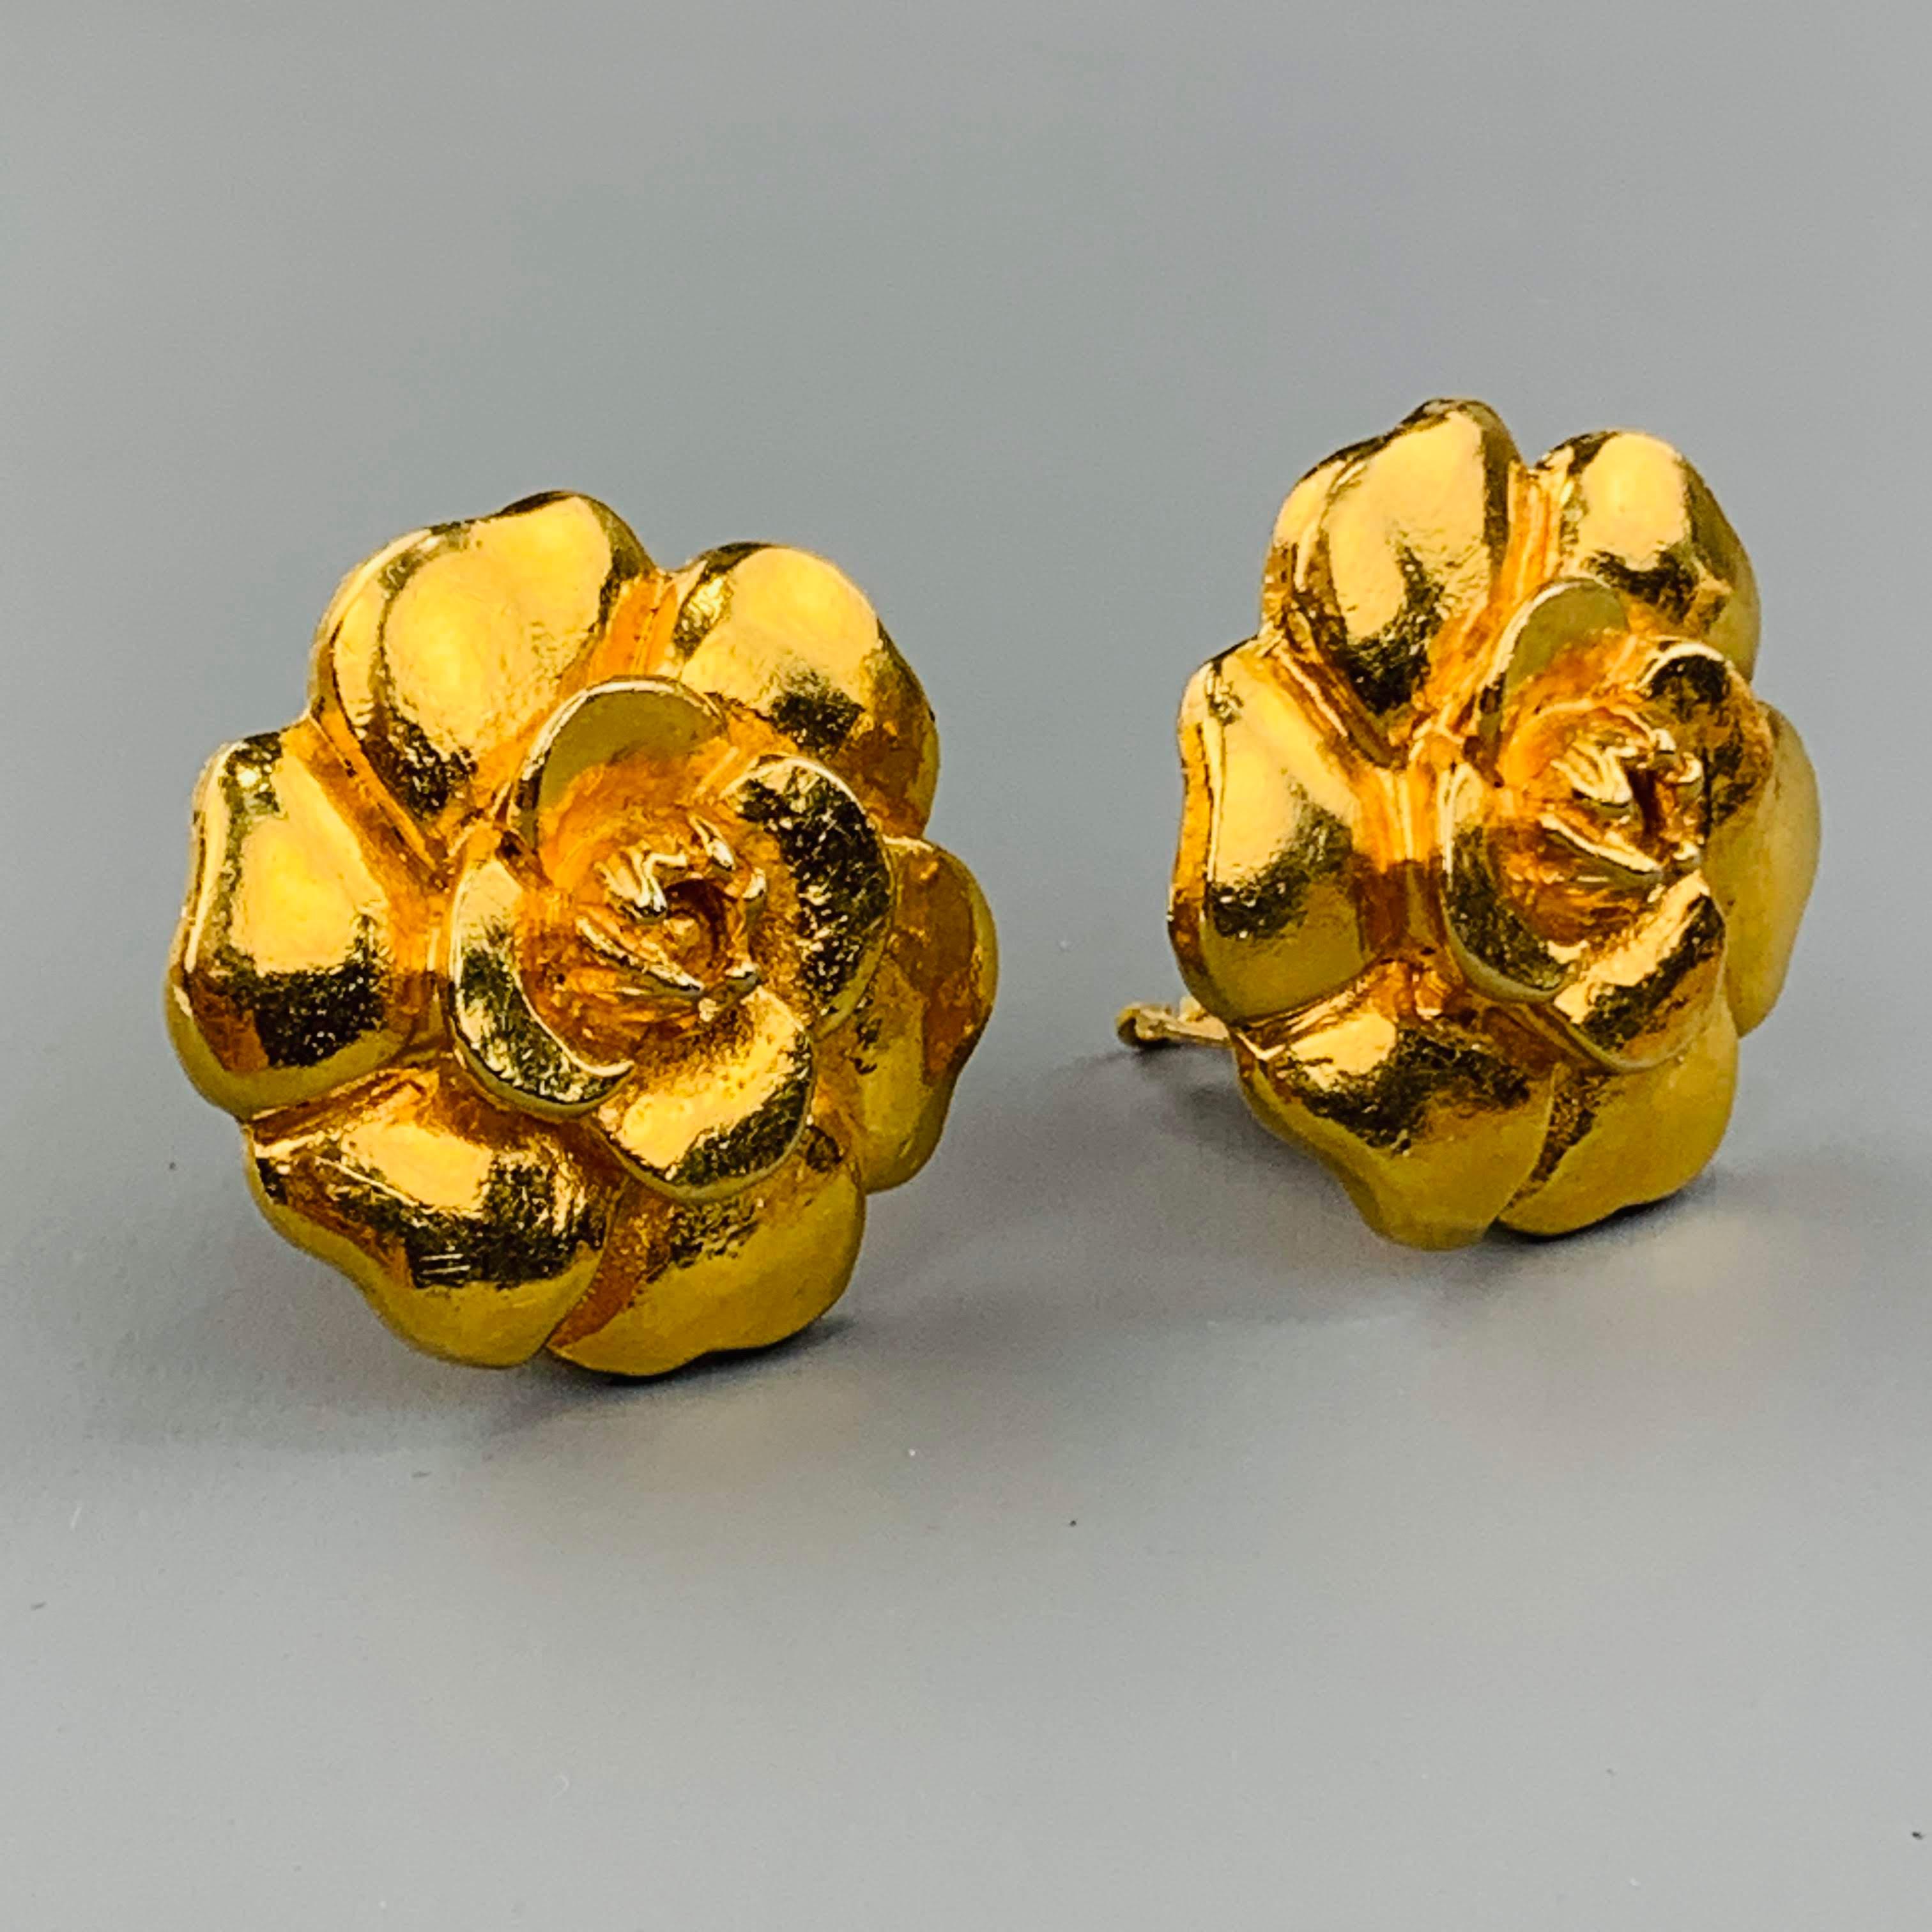 Vintage CHANEL (Circa 1971-1980) clip on earrings come in yellow gold tone metal with a 3D Camellia flower motif. Wear from age. Made in France.
 
Good Pre-Owned Condition.
 
3.5 x 3.25 cm.